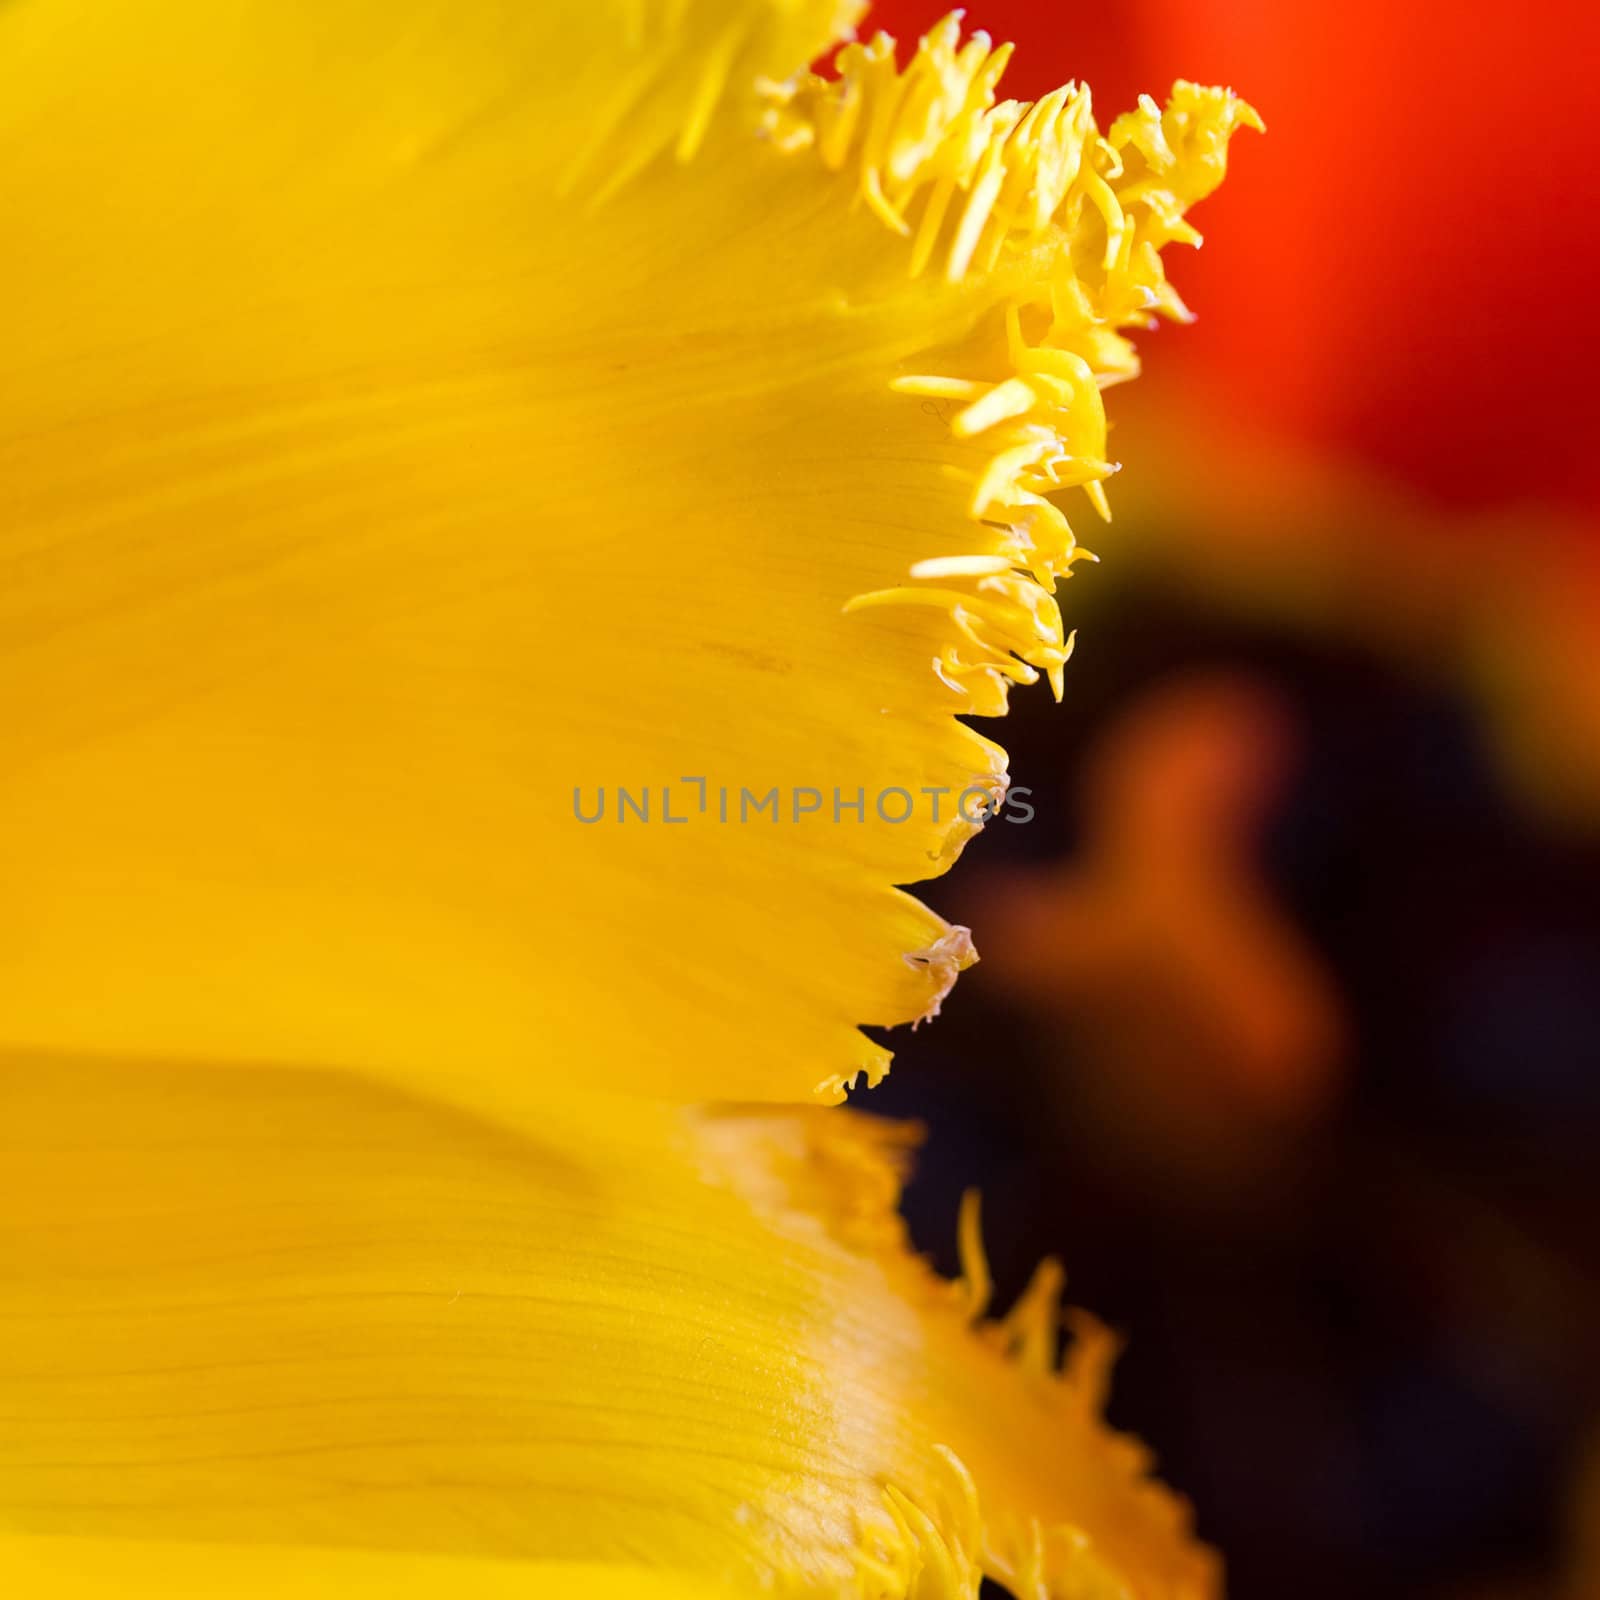 Stock photo: an image of nice red and yellow tulips